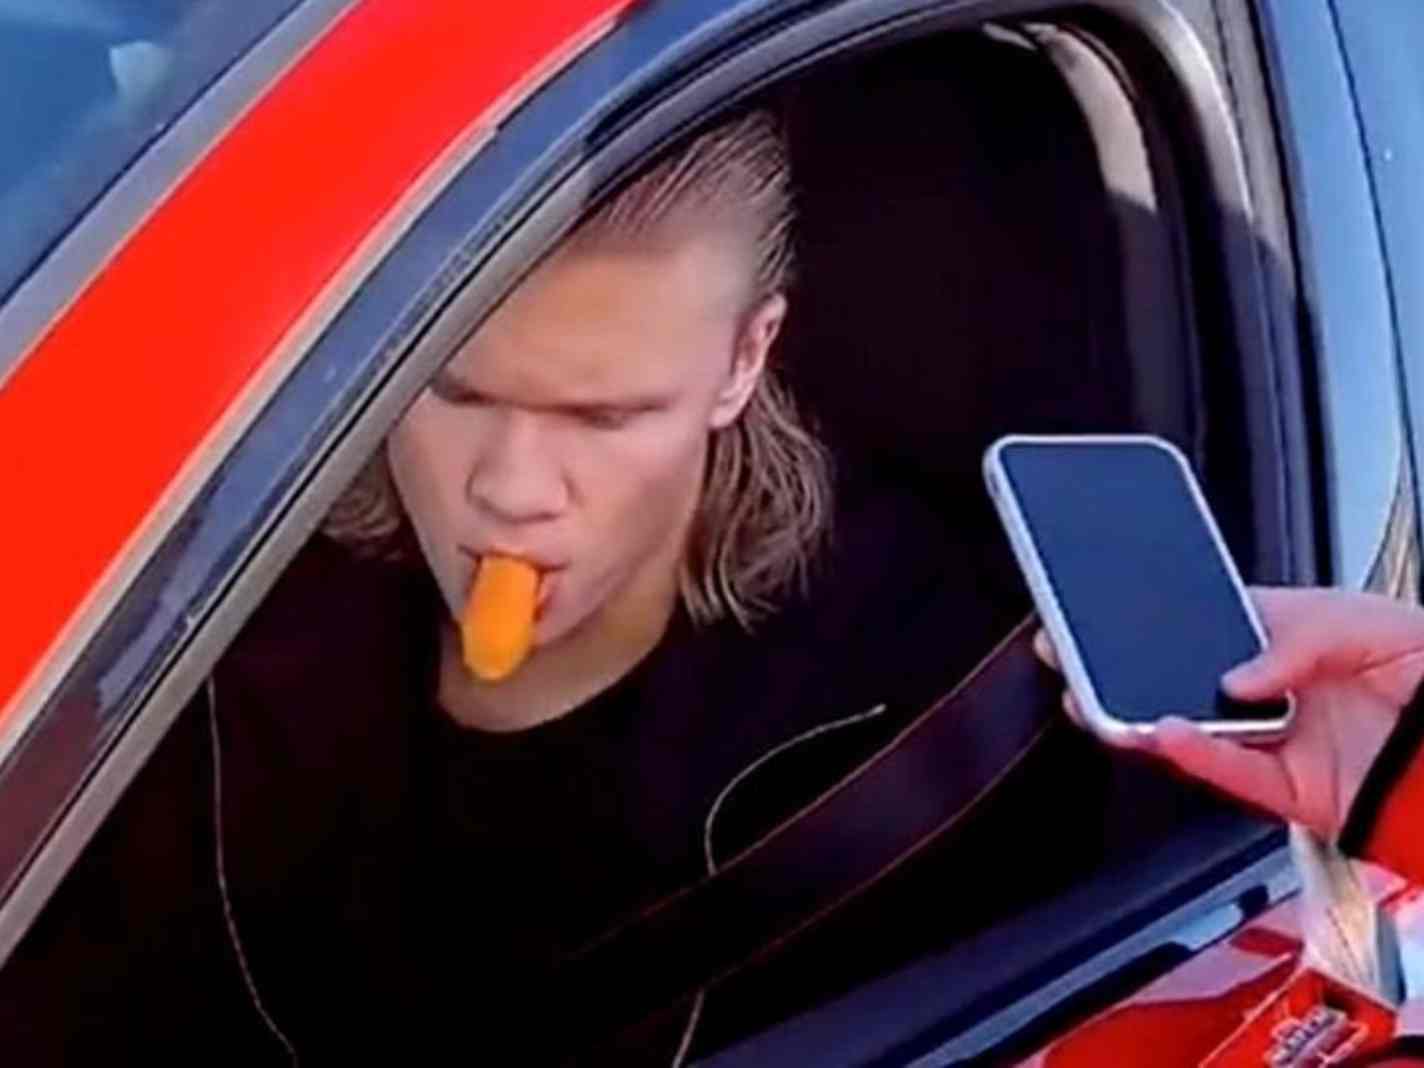 The Reason Why Meat-Loving Erling Haaland Has Carrots In His Diet